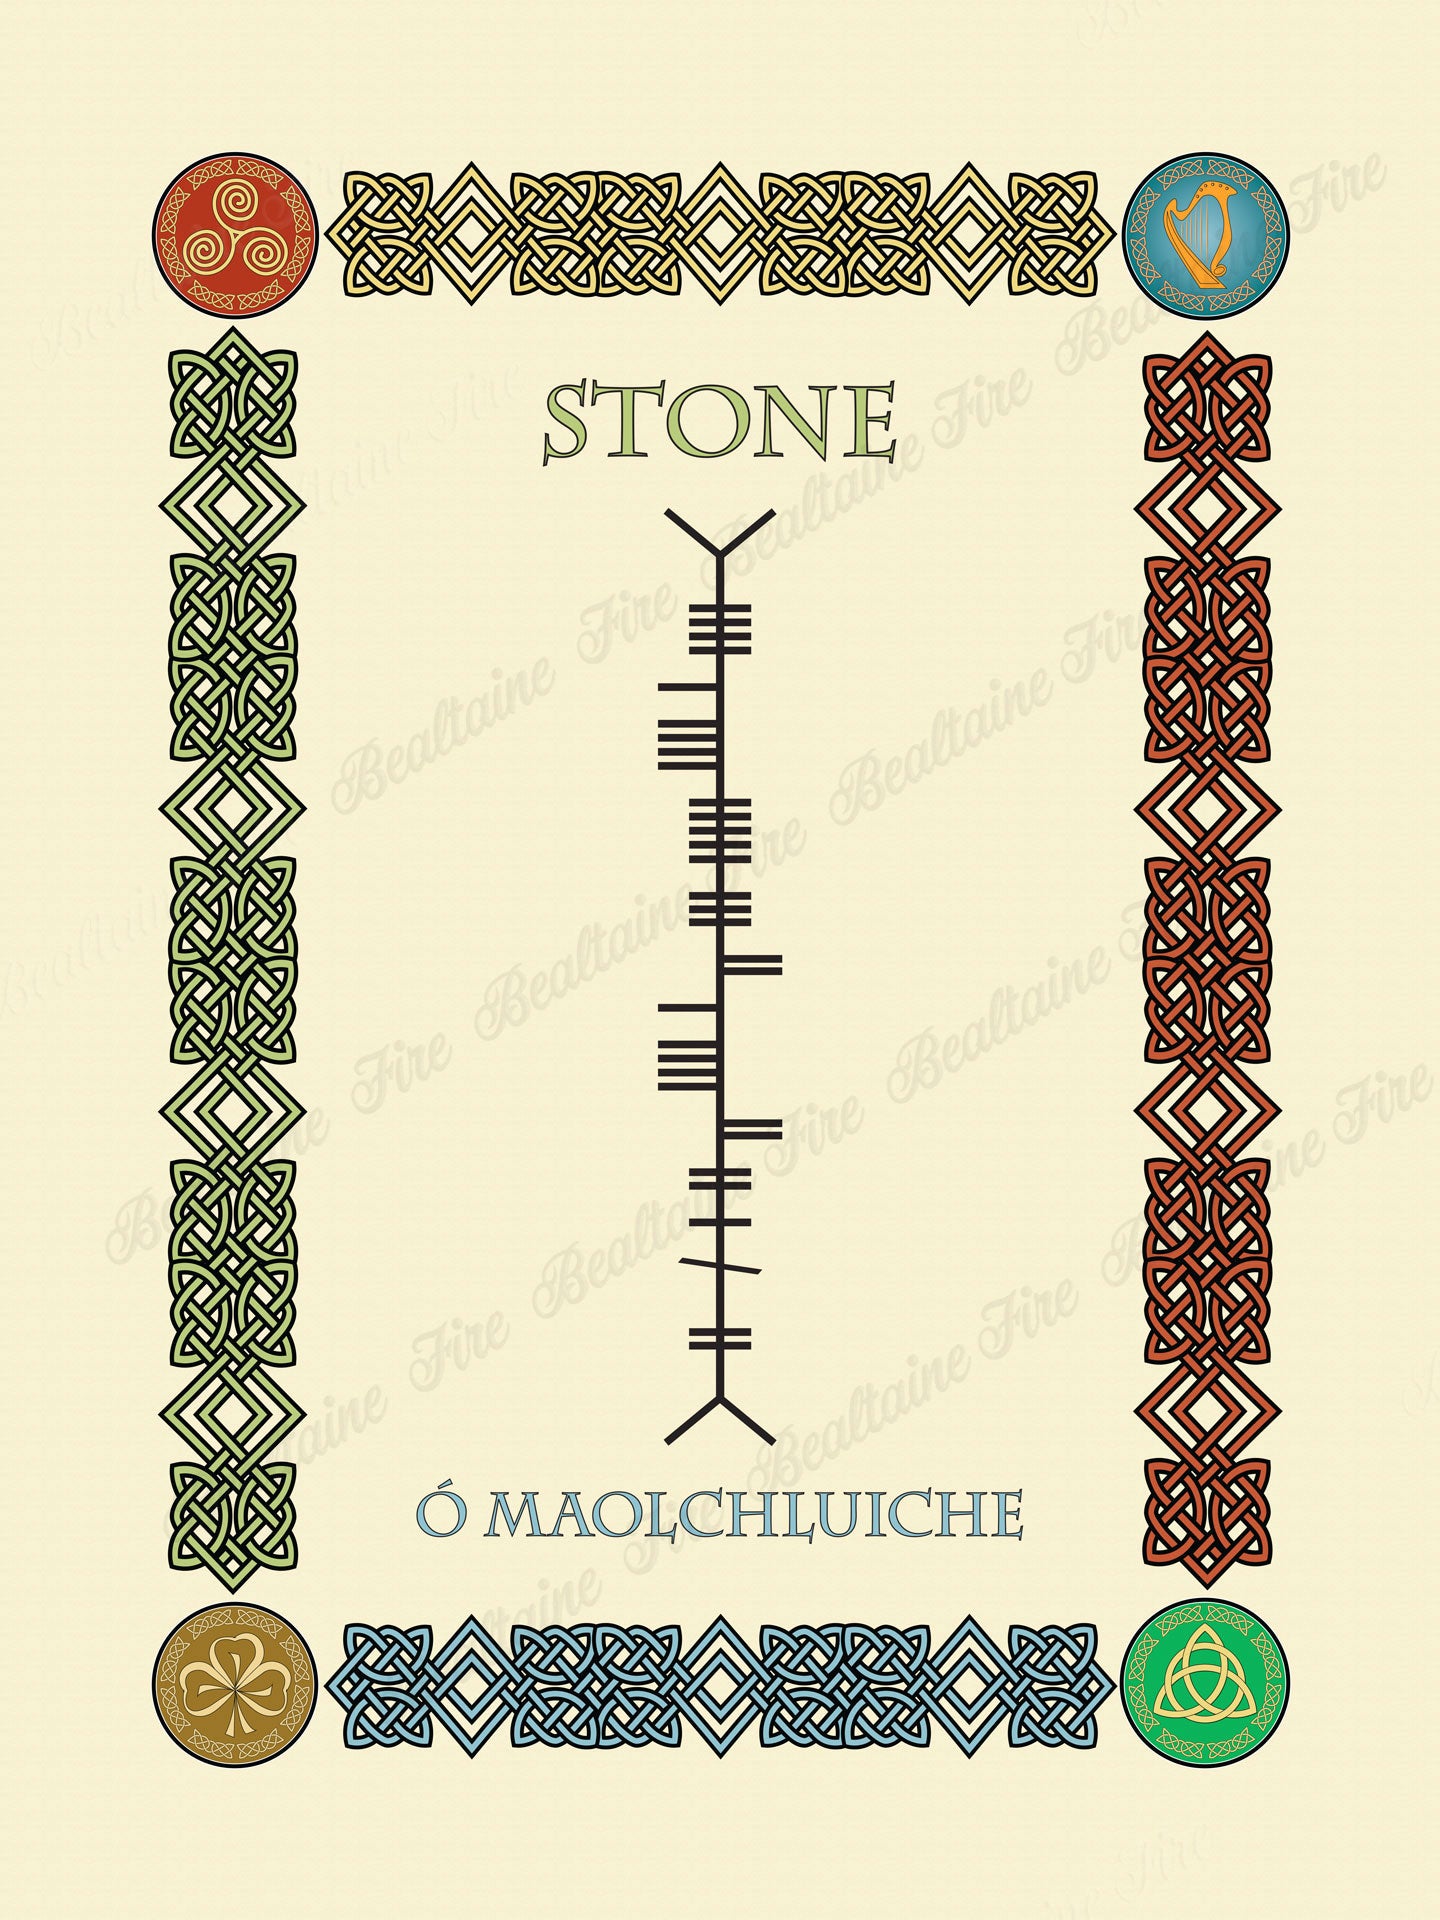 Stone in Old Irish and Ogham - Premium luster unframed print